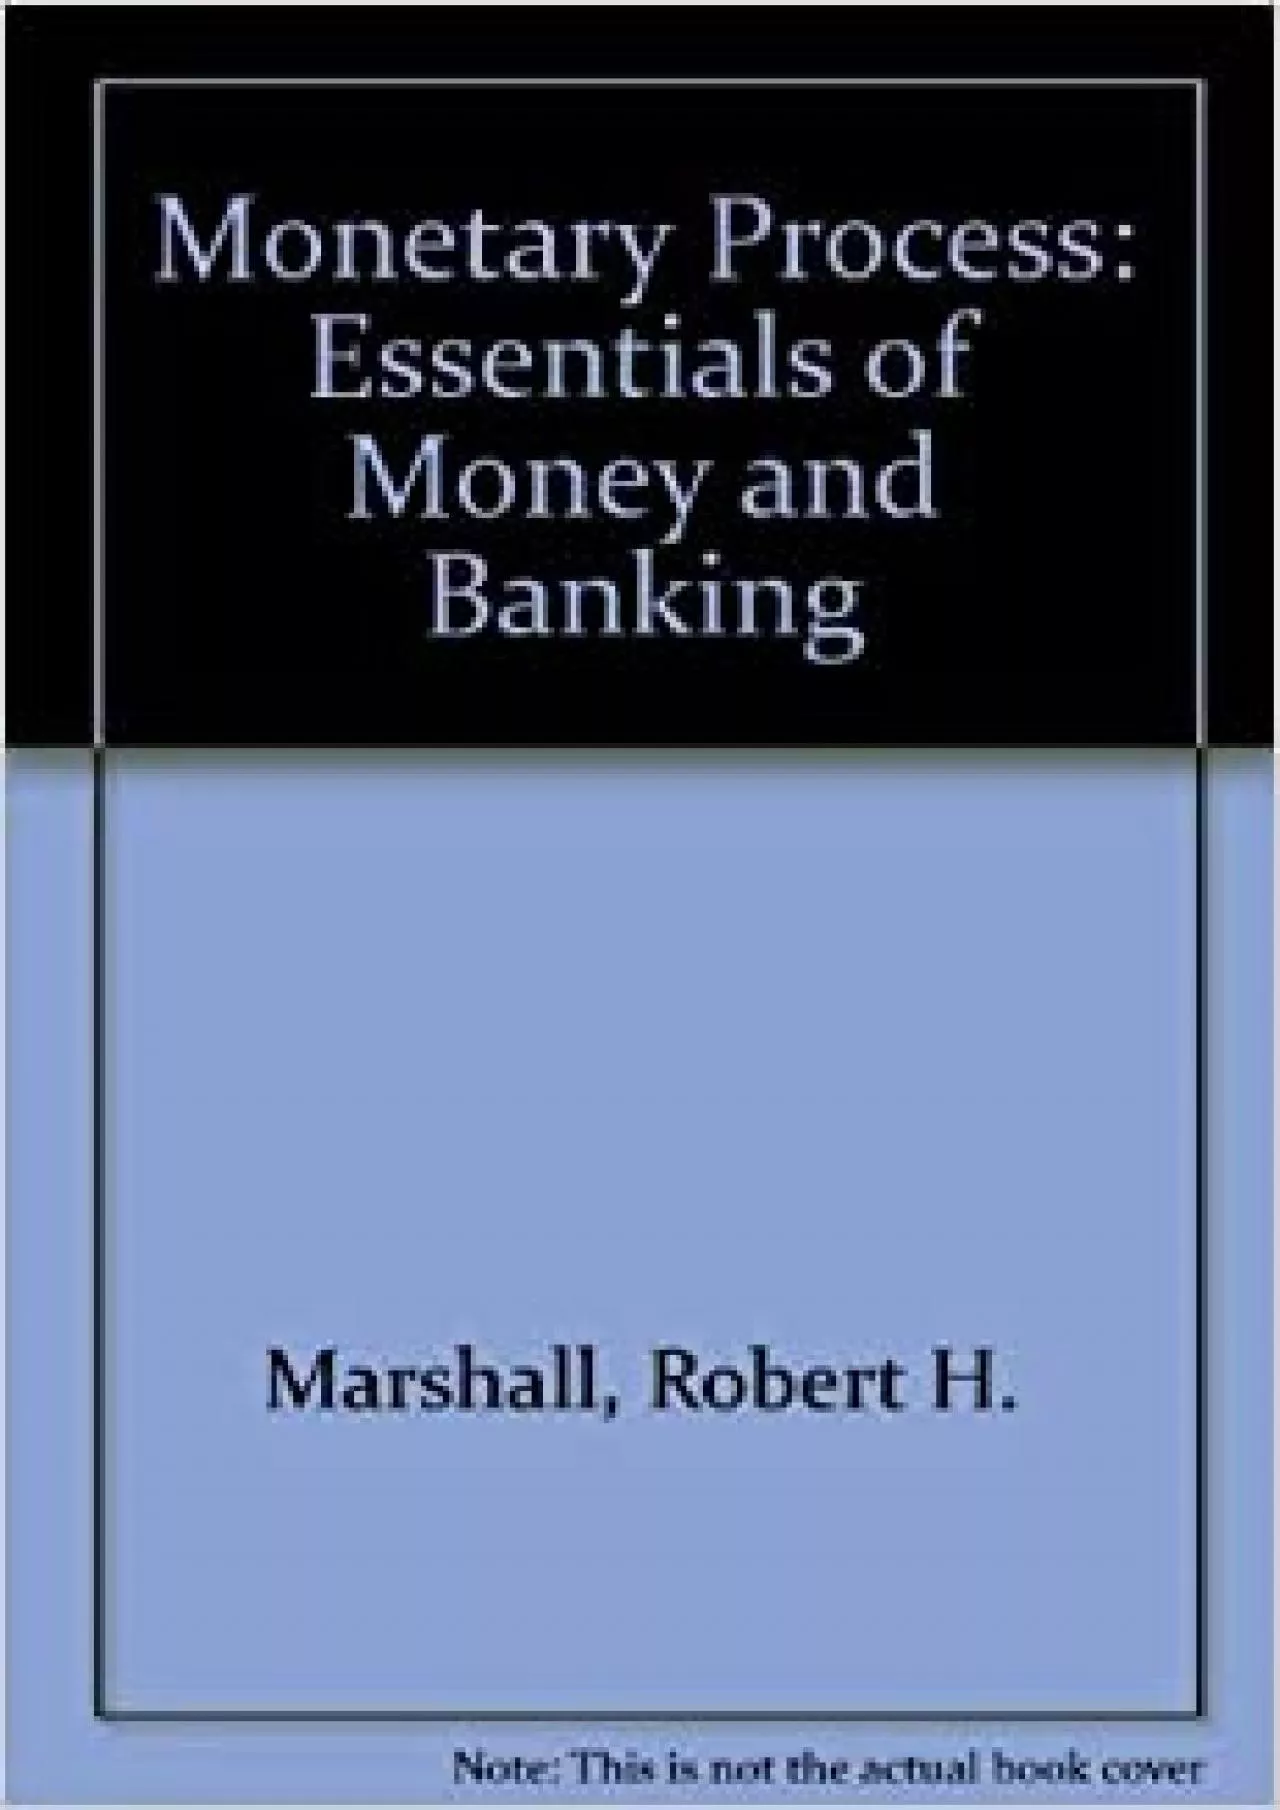 The monetary process: Essentials of money and banking